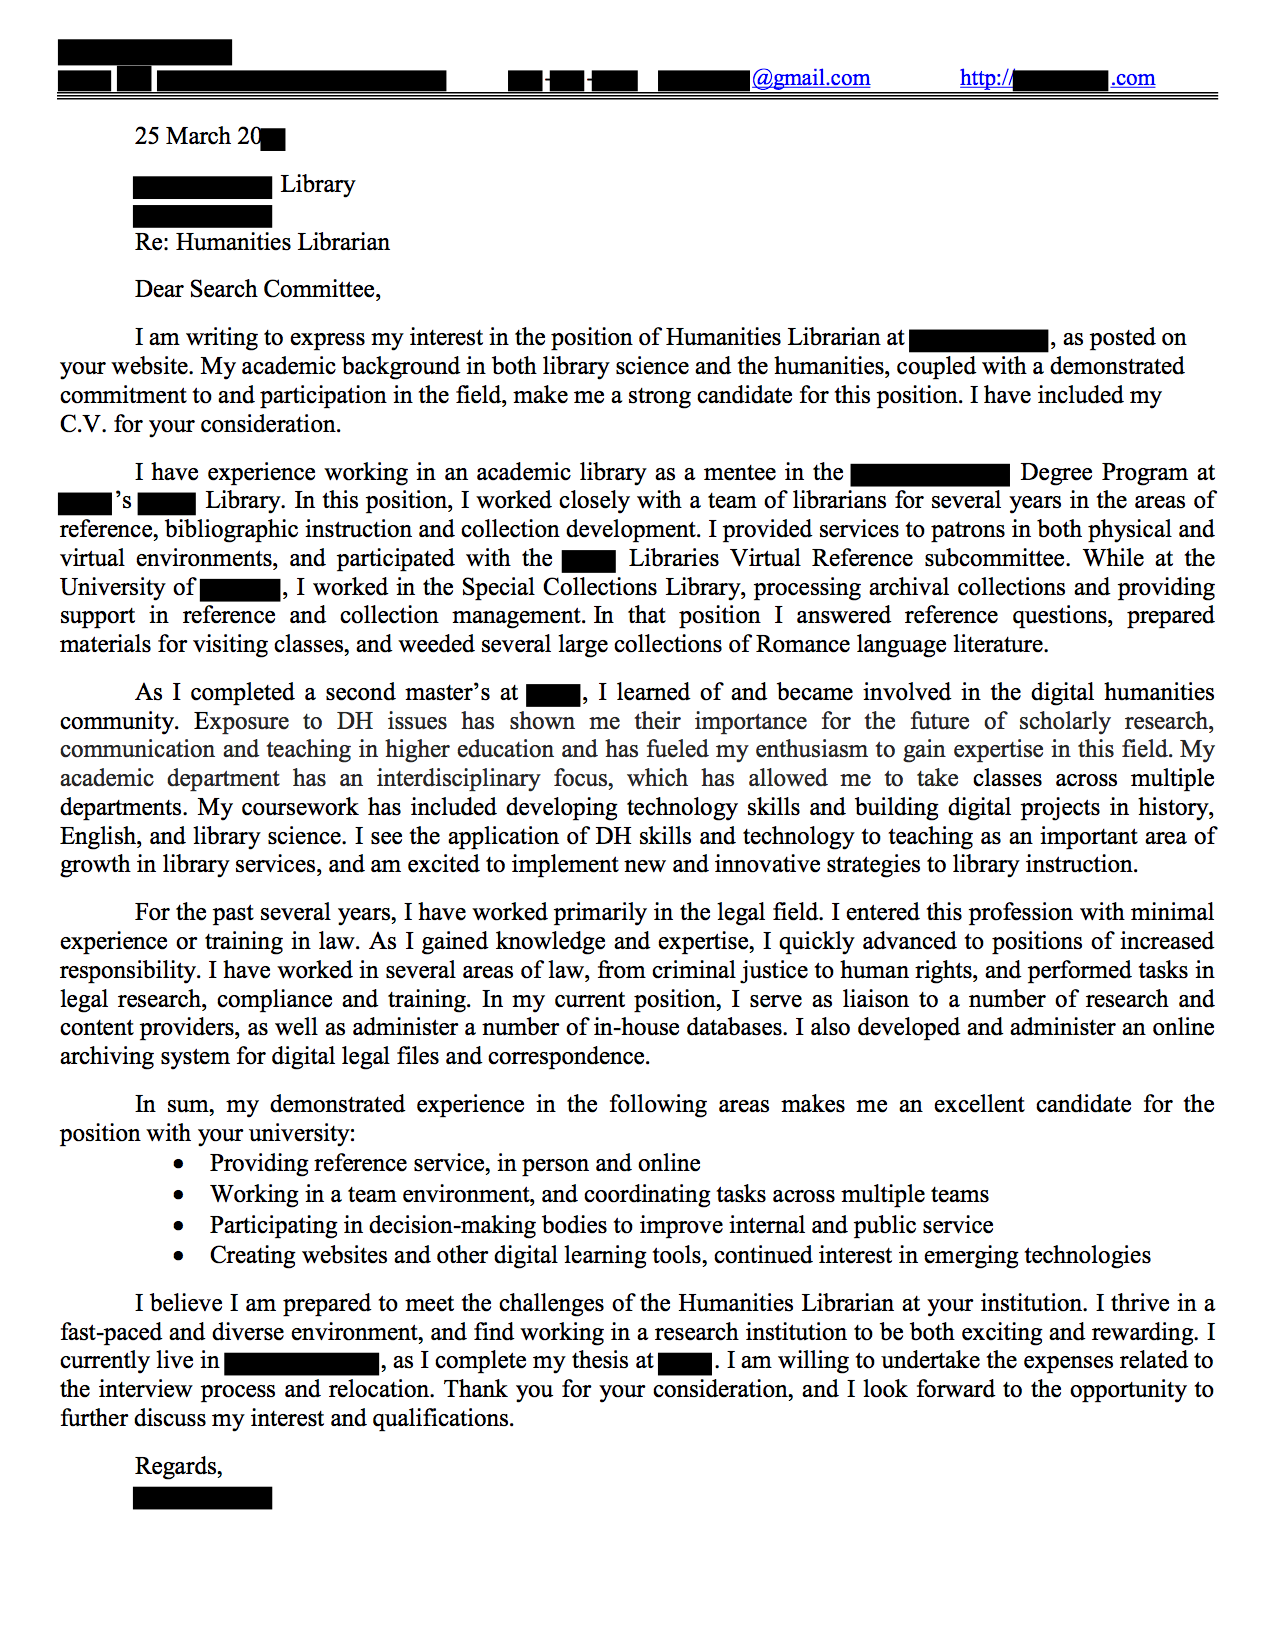 Sample cover letter for a community college teaching position